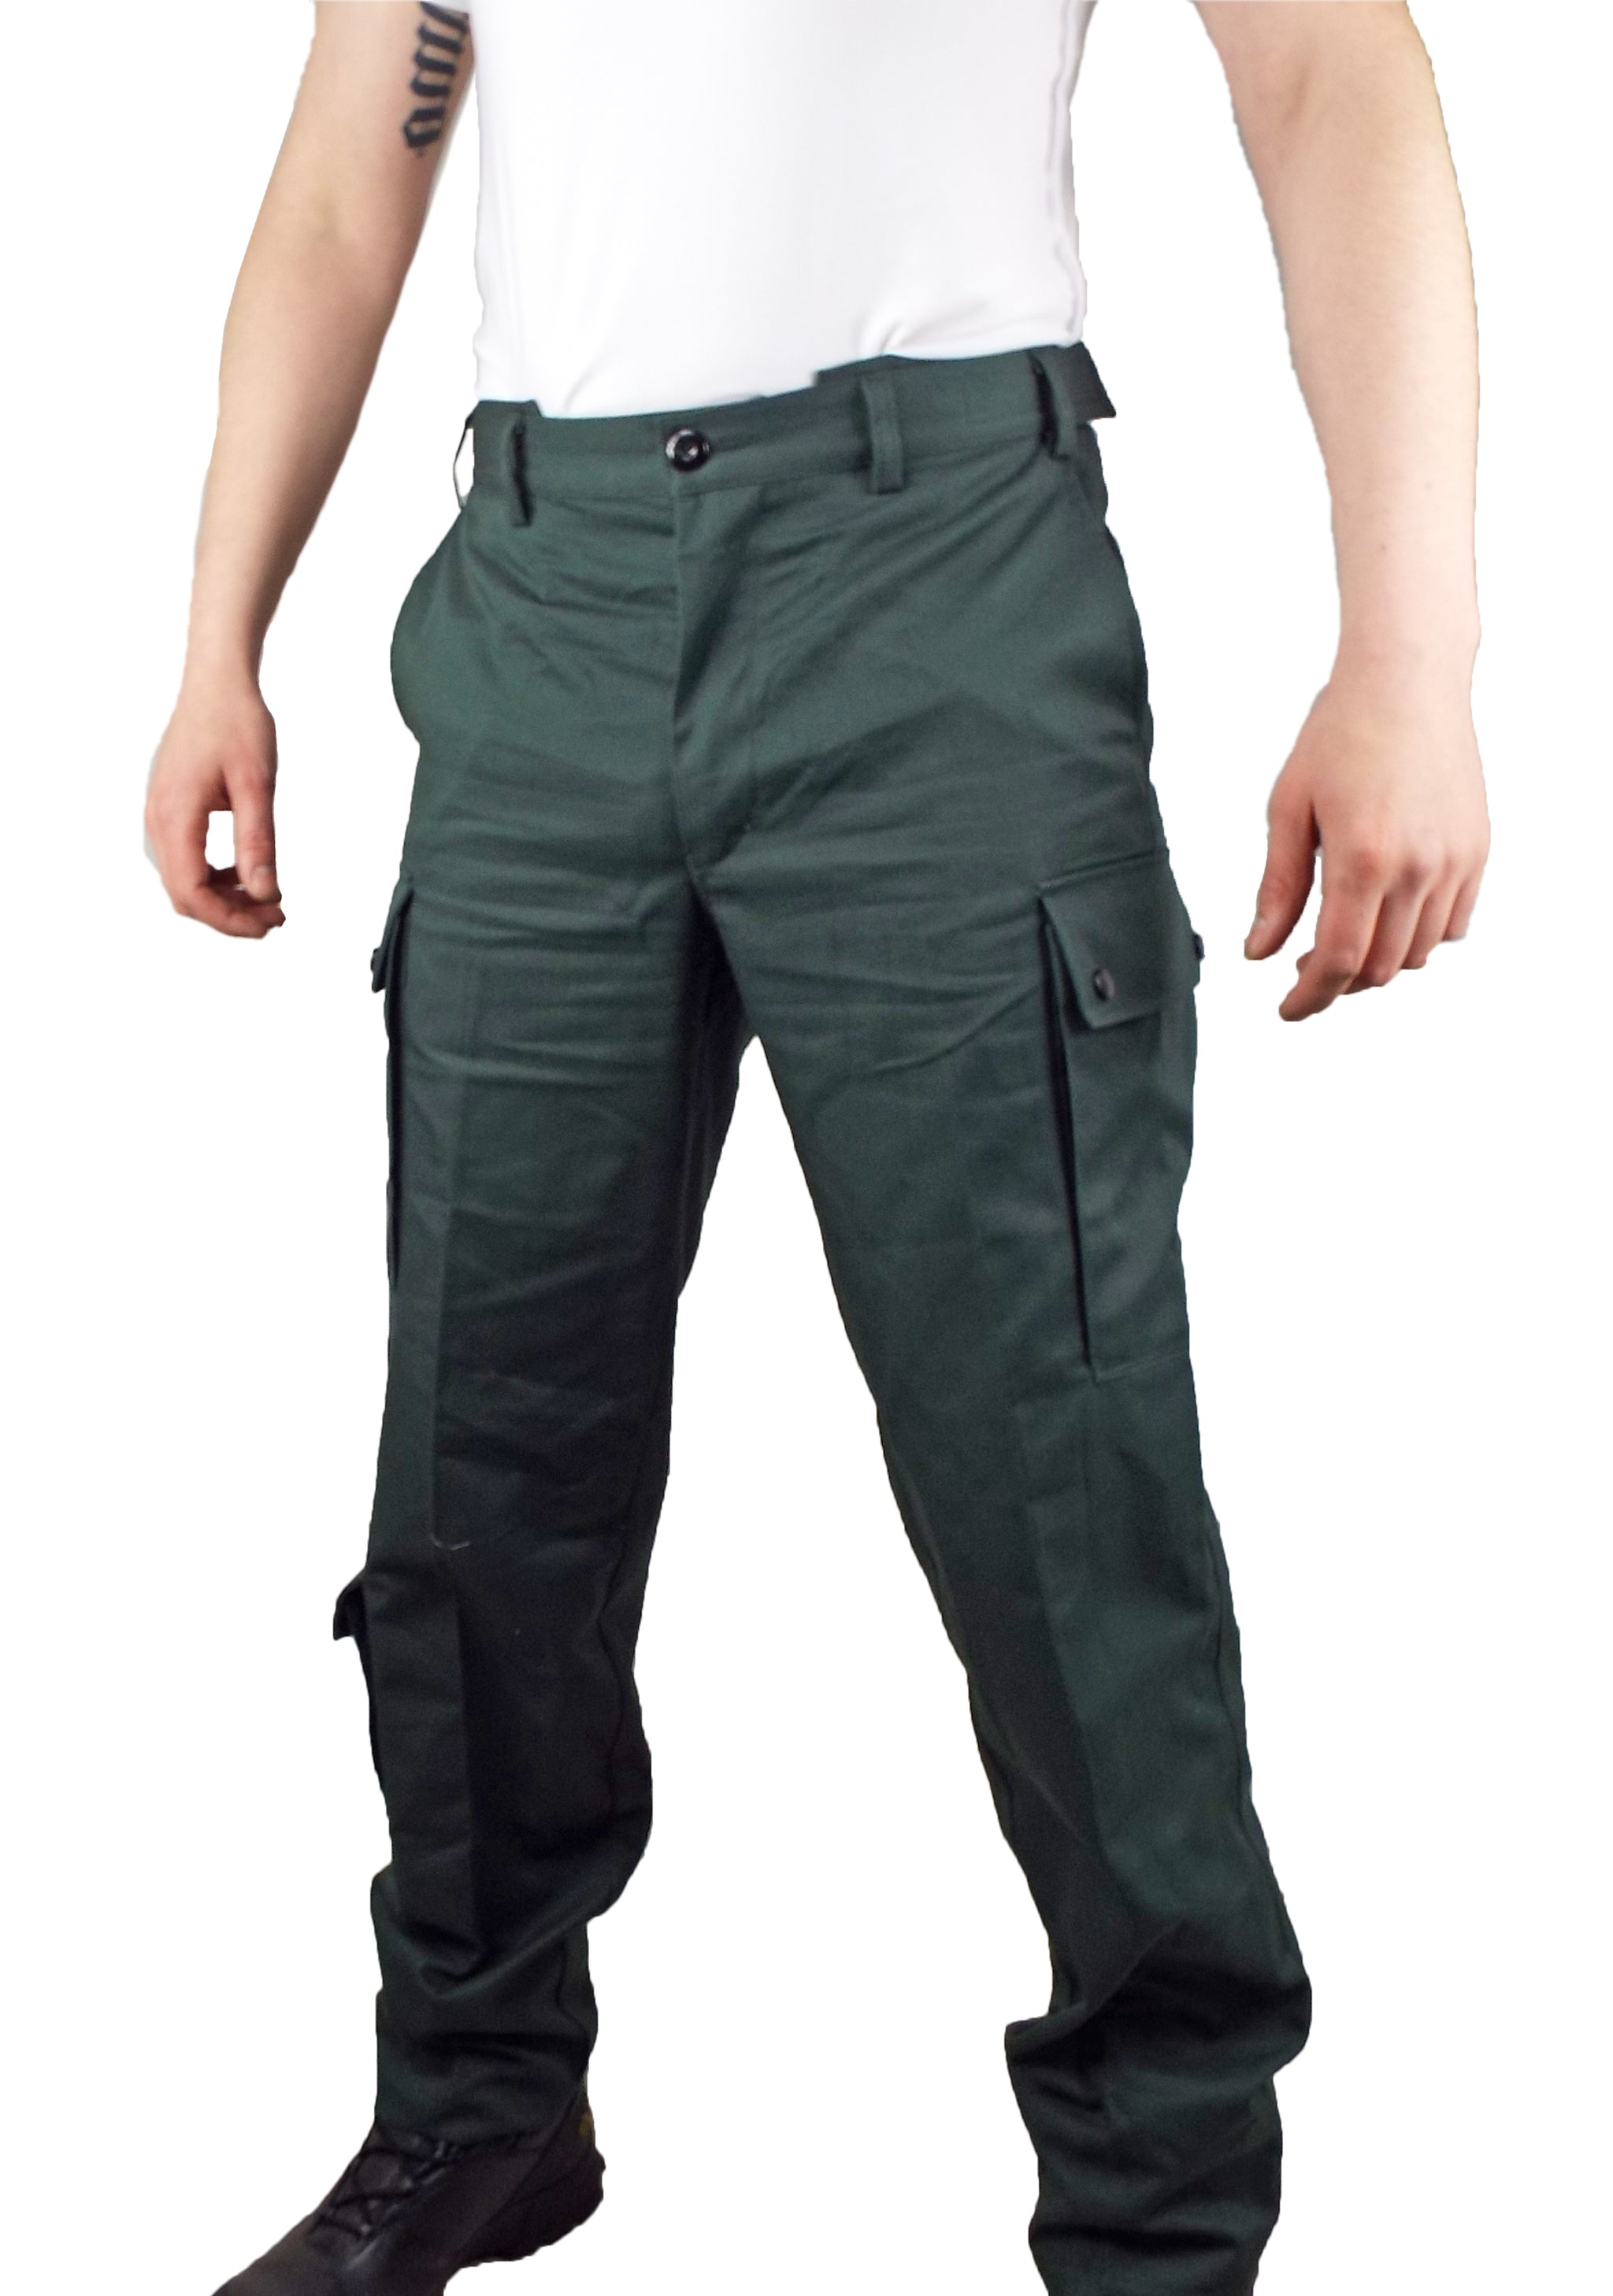 Dutch Military - Green Six Pocket Combat Trousers - Grade 1 - Forces  Uniform and Kit